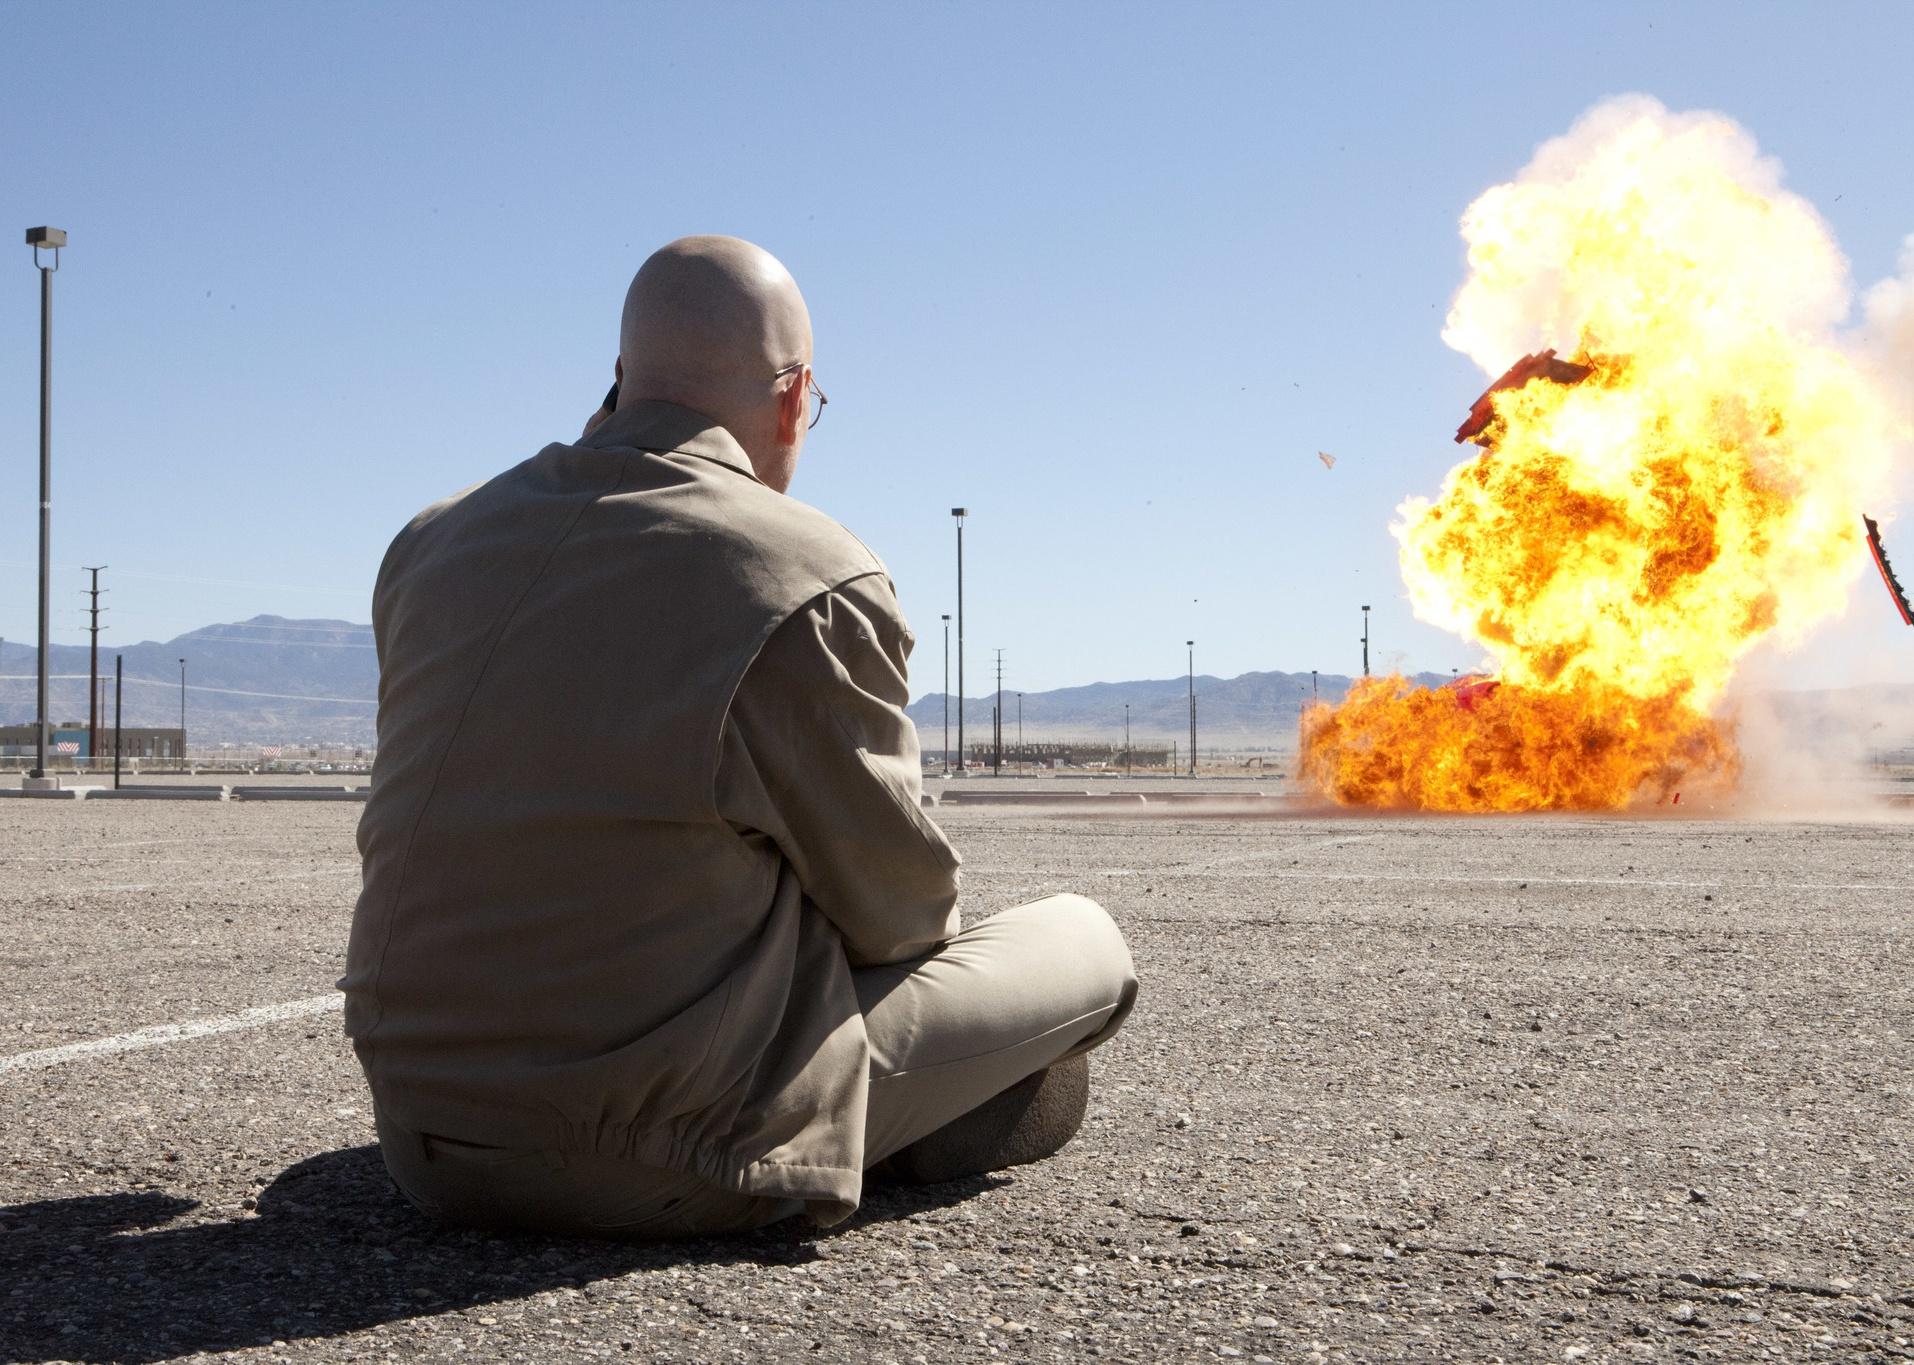 Bryan Cranston sitting on the pavement watching an explosion.